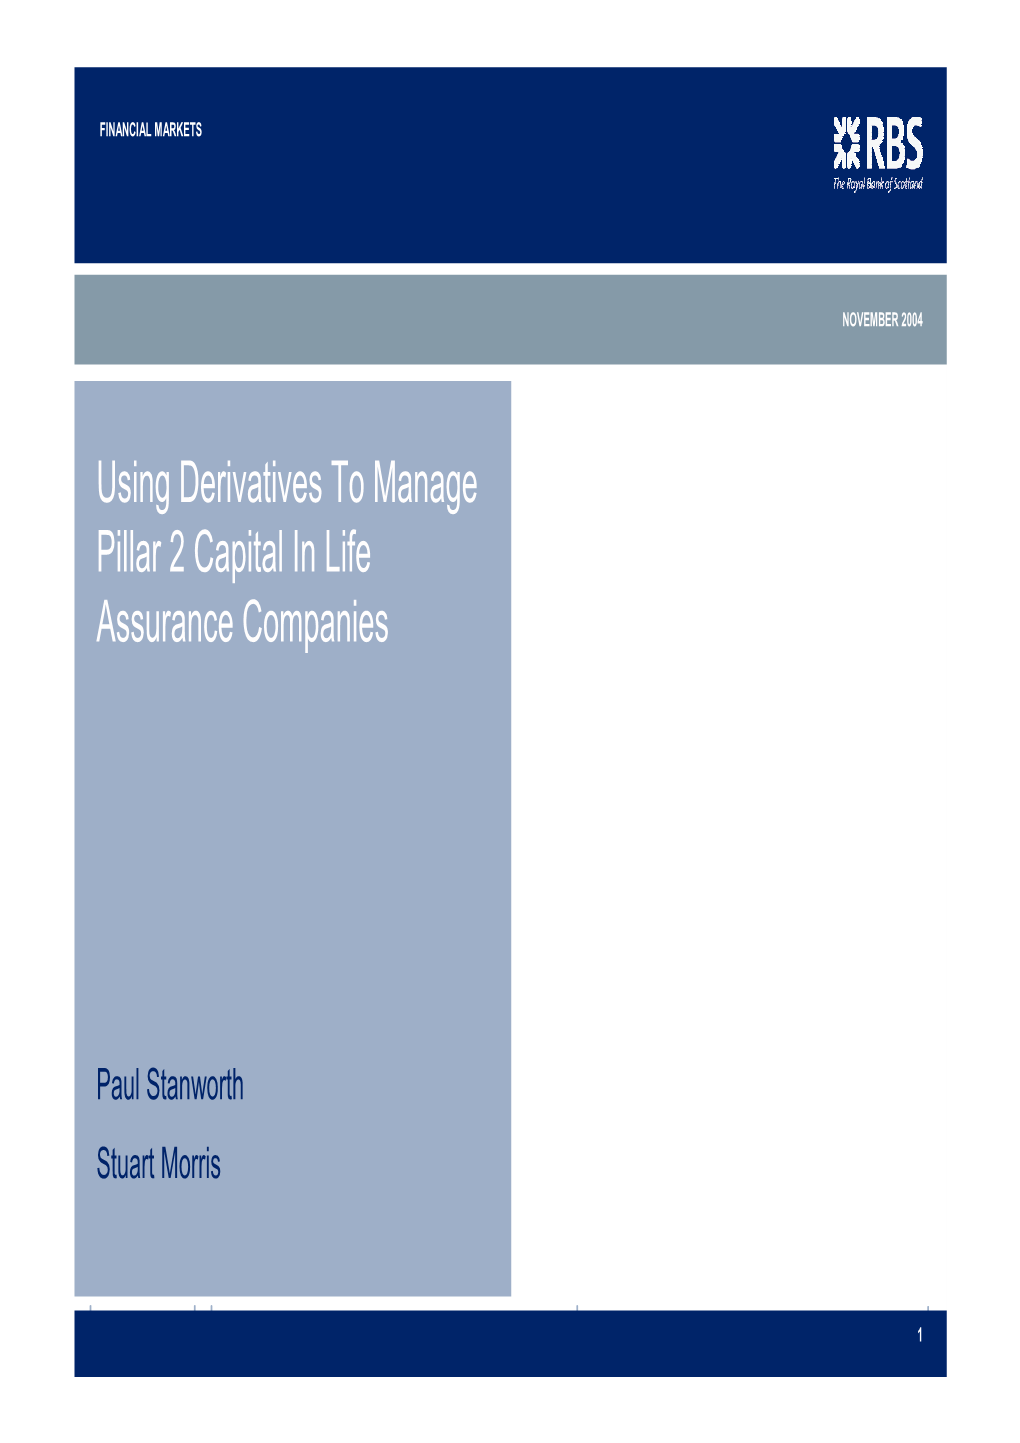 Using Derivatives to Manage Pillar 2 Capital in Life Assurance Companies